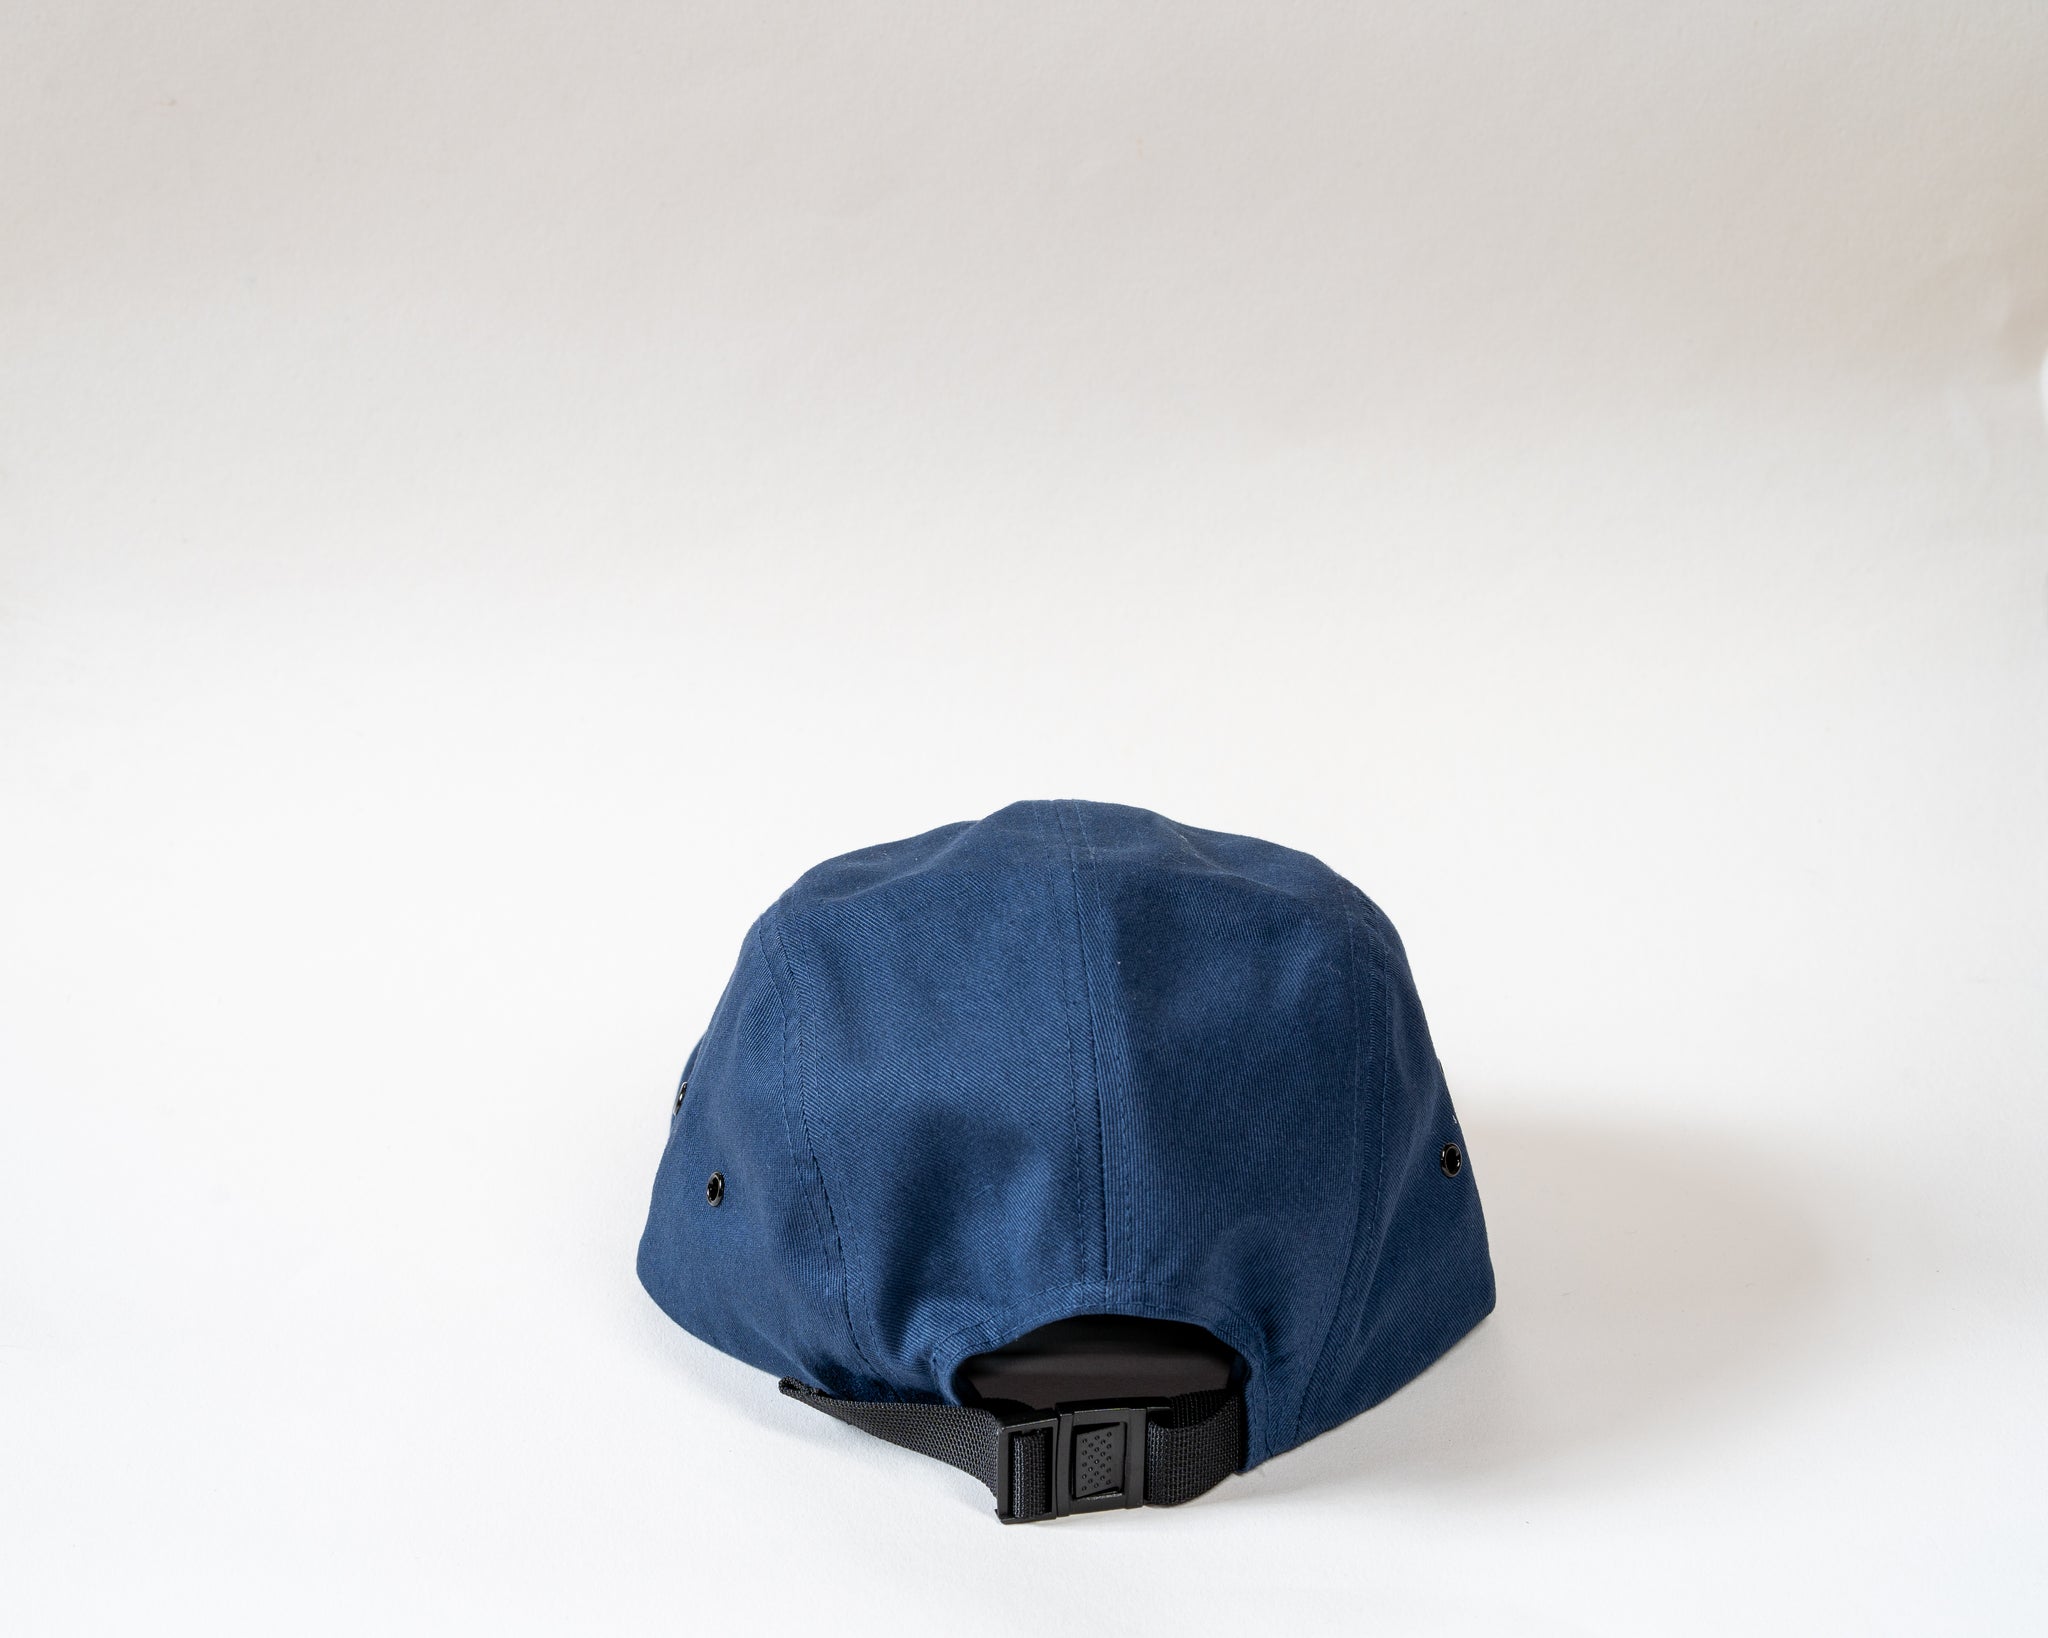 Navy 5 panel cap showcasing the rear clasp on a white background